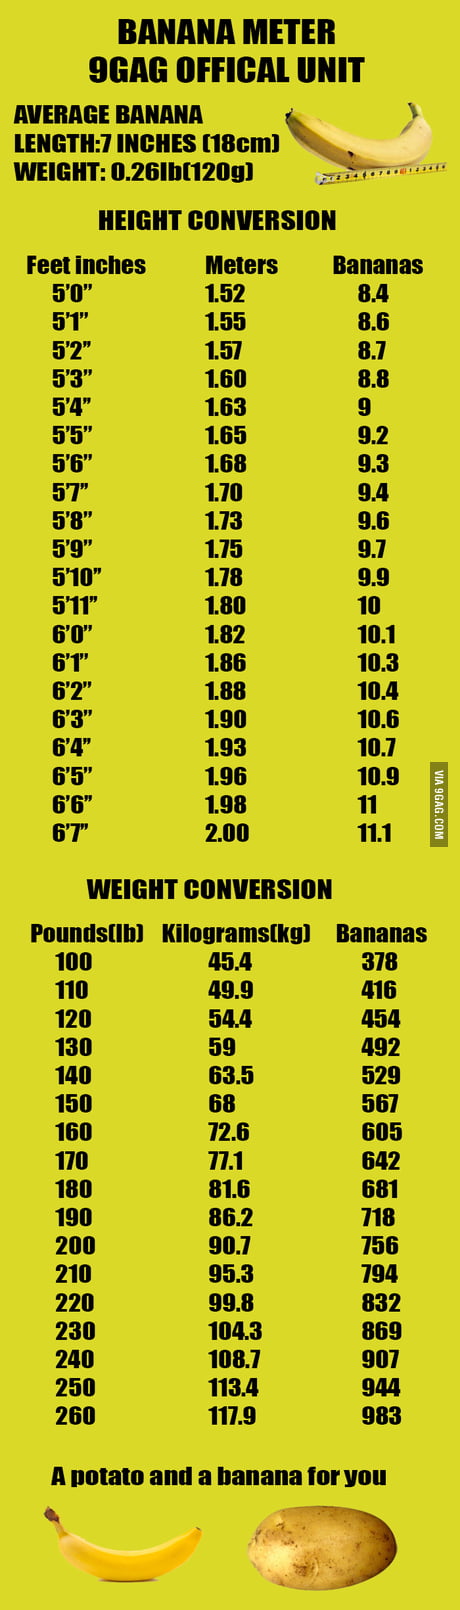 Banana Meter: How tall are you and how much you weigh in bananas? - 9GAG